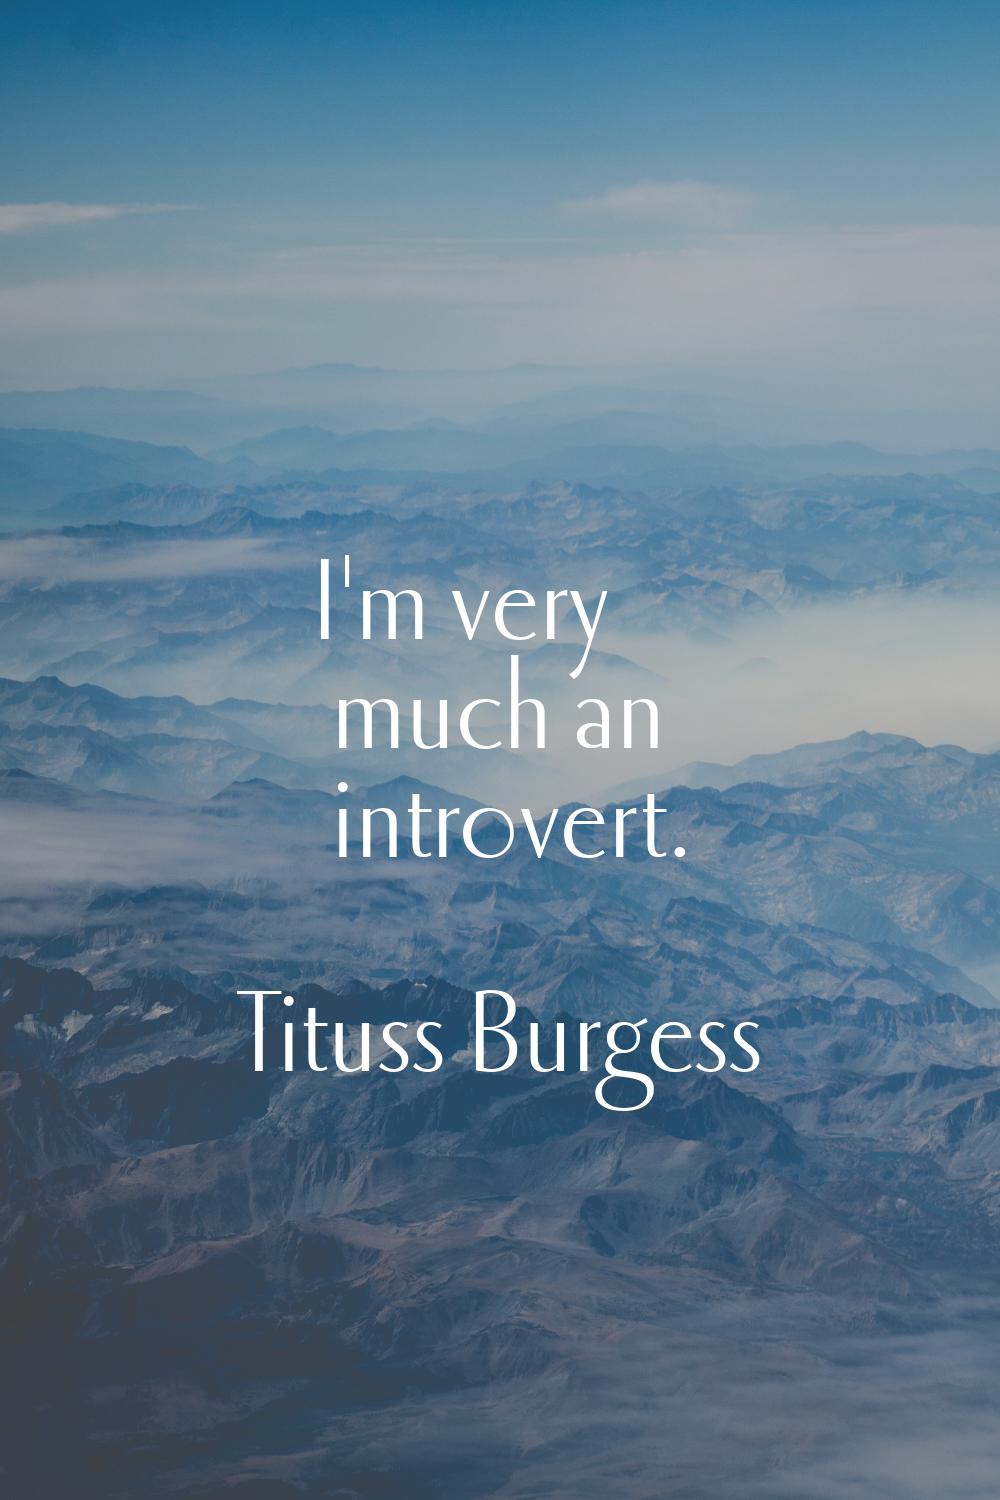 I'm very much an introvert.